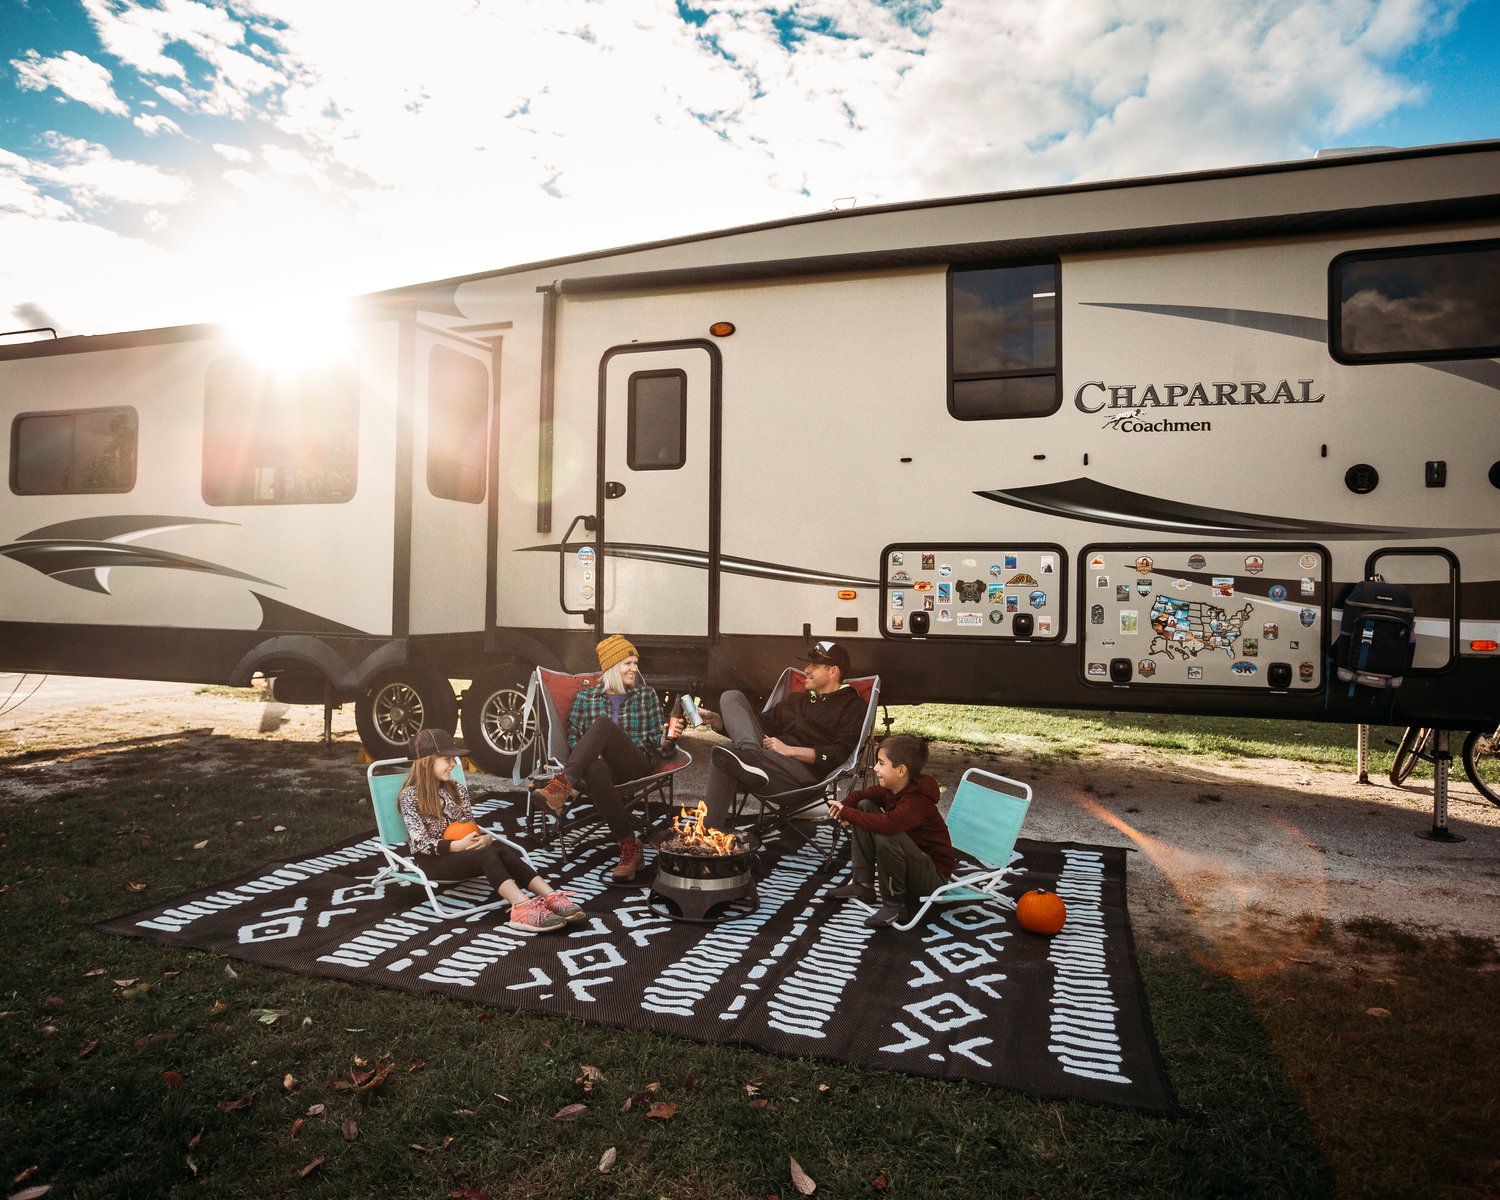 Glamplife eco-friendly RV and camping rugs and accessories